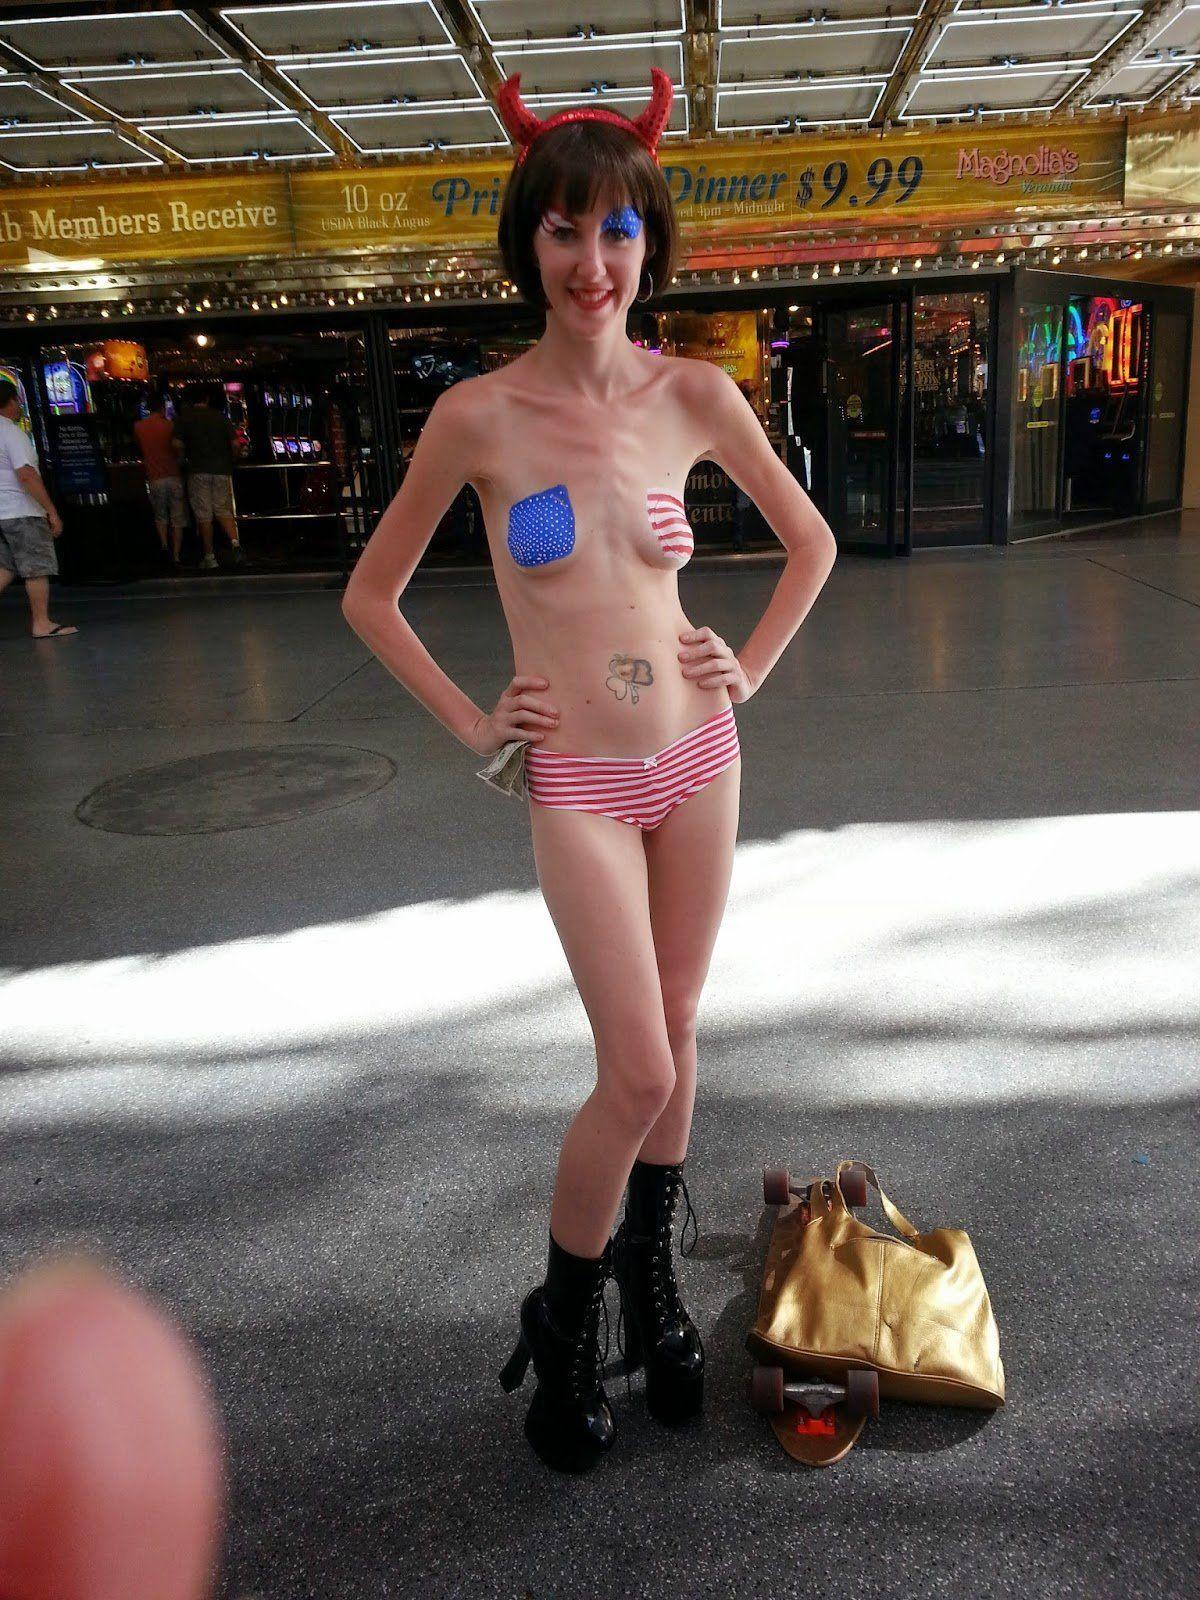 Nude women in vegas photos - Adult Images.